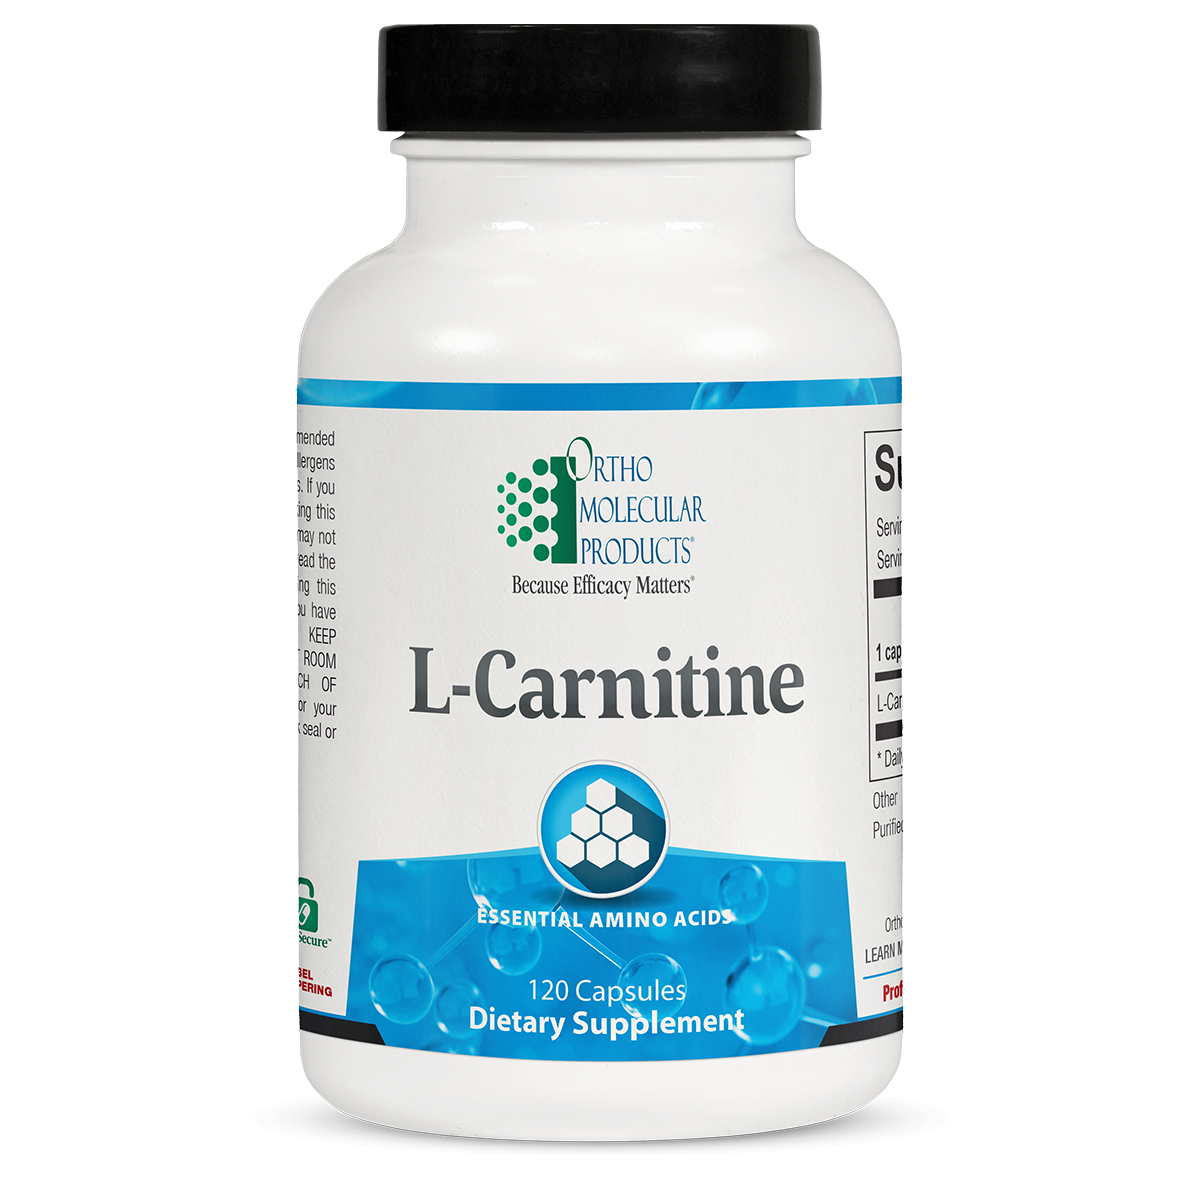 L Carnitine 120 capsules (Previously carried L Carnitine by Pure)